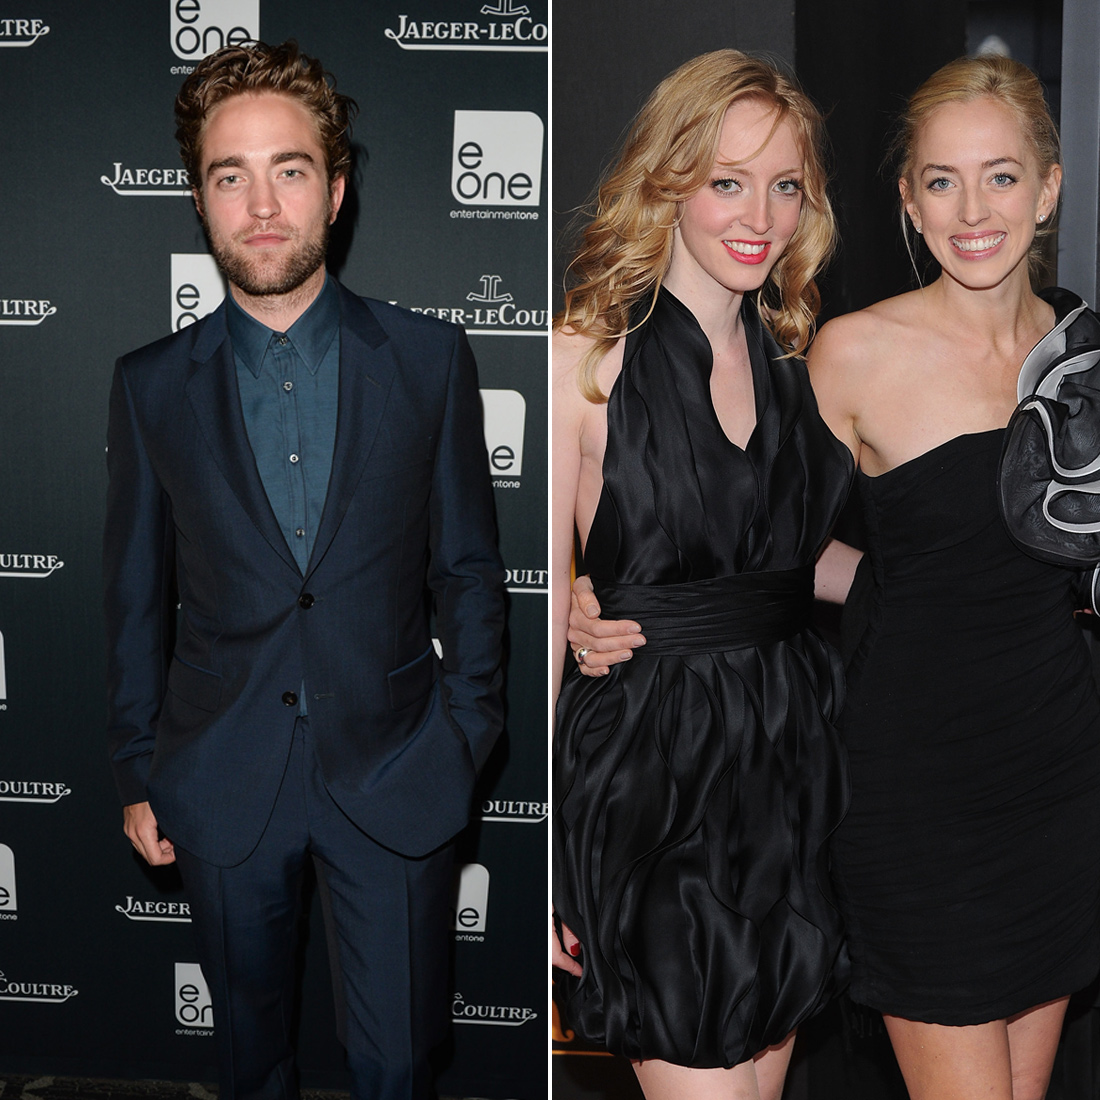 Robert Lizzy And Victoria Pattinson Celebrity Siblings You Probably Didnt Know About